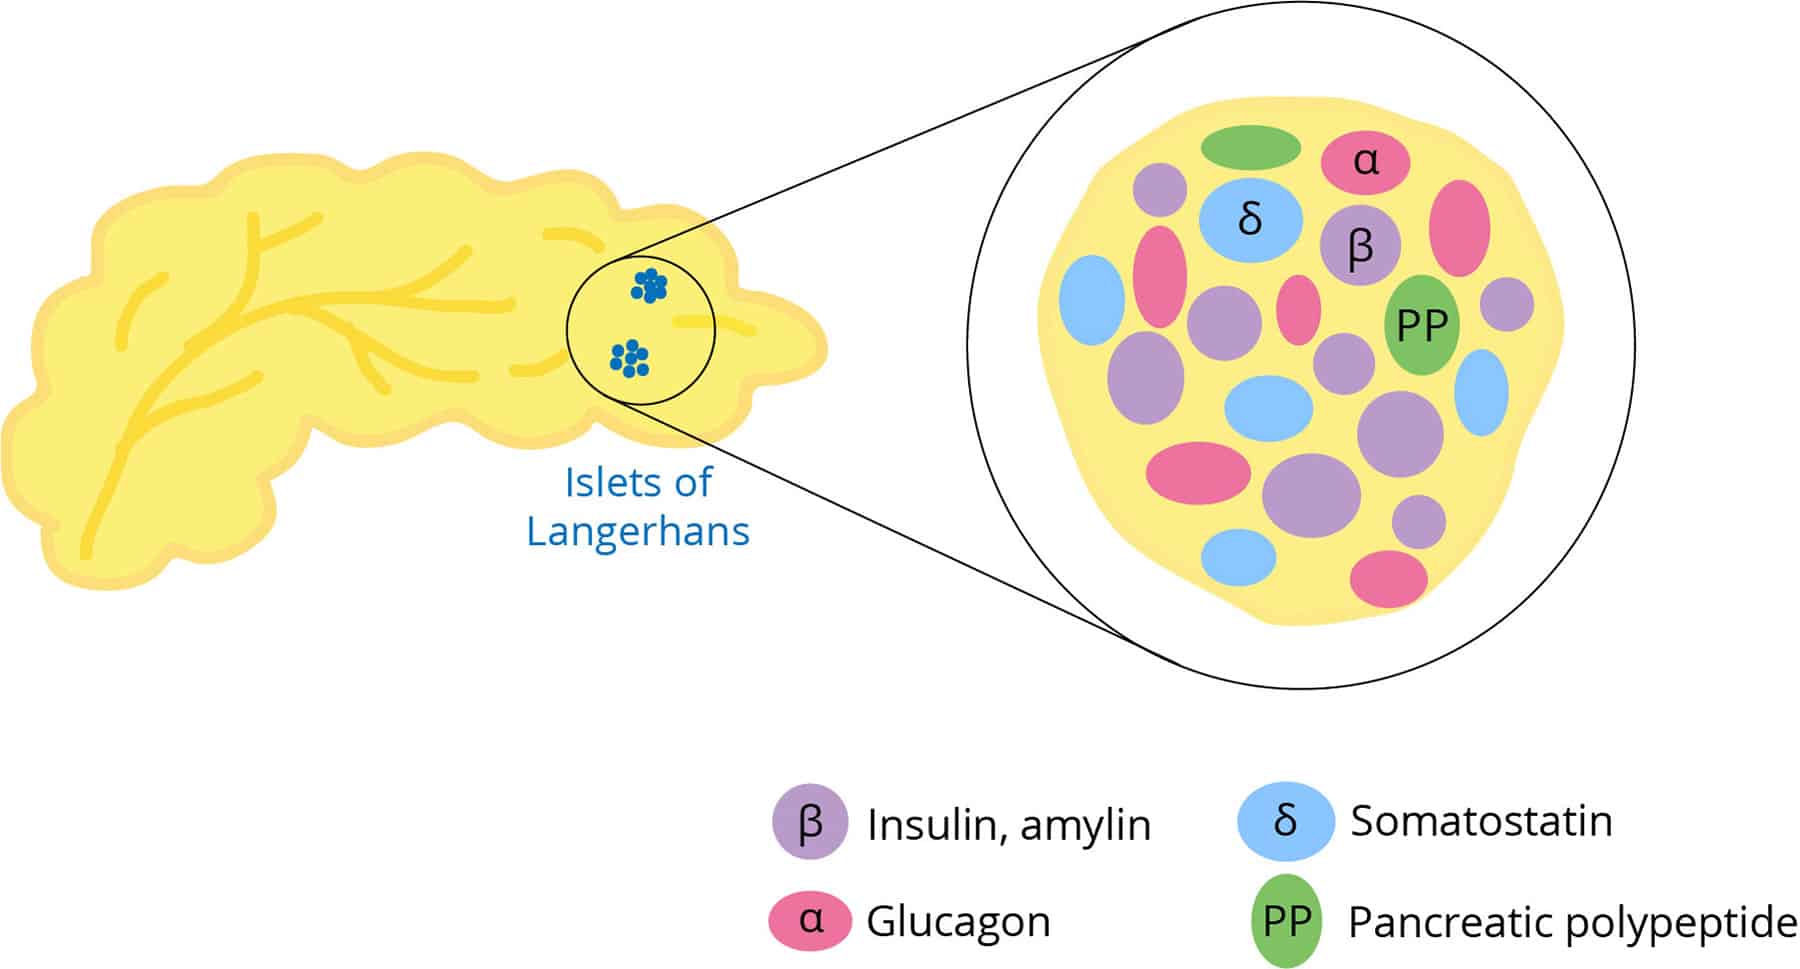 Cartoon pancreas with Islets of Langerhans highlighted. Zoomed in view shows different cell types: alpha, beta, delta, and PP cells. Legend shows beta cells produce insulin and amylin, alpha cells produce glucagon, delta cells produce somatostatin, PP cells produce pancreatic polypeptide.